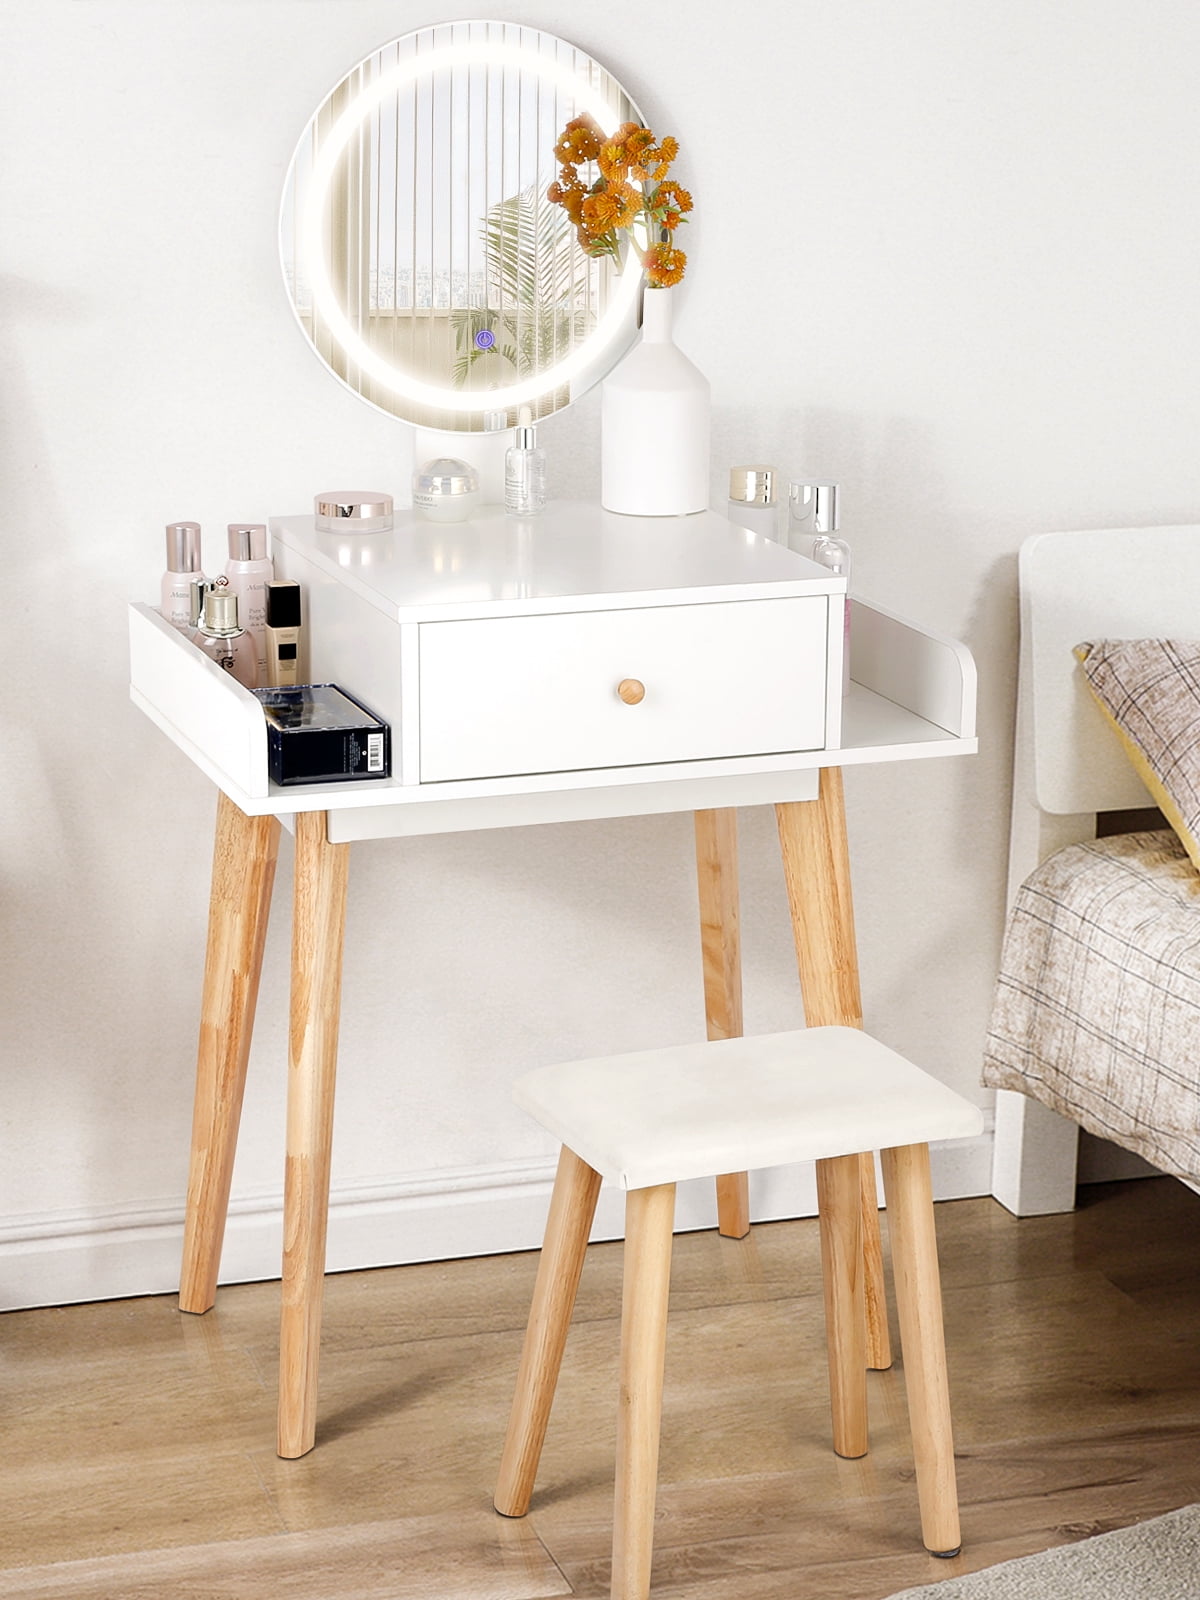 Details about   Wooden Kids Snow Vanity Set Dressing Table Make Up Beauty Desk With Stool Mirror 